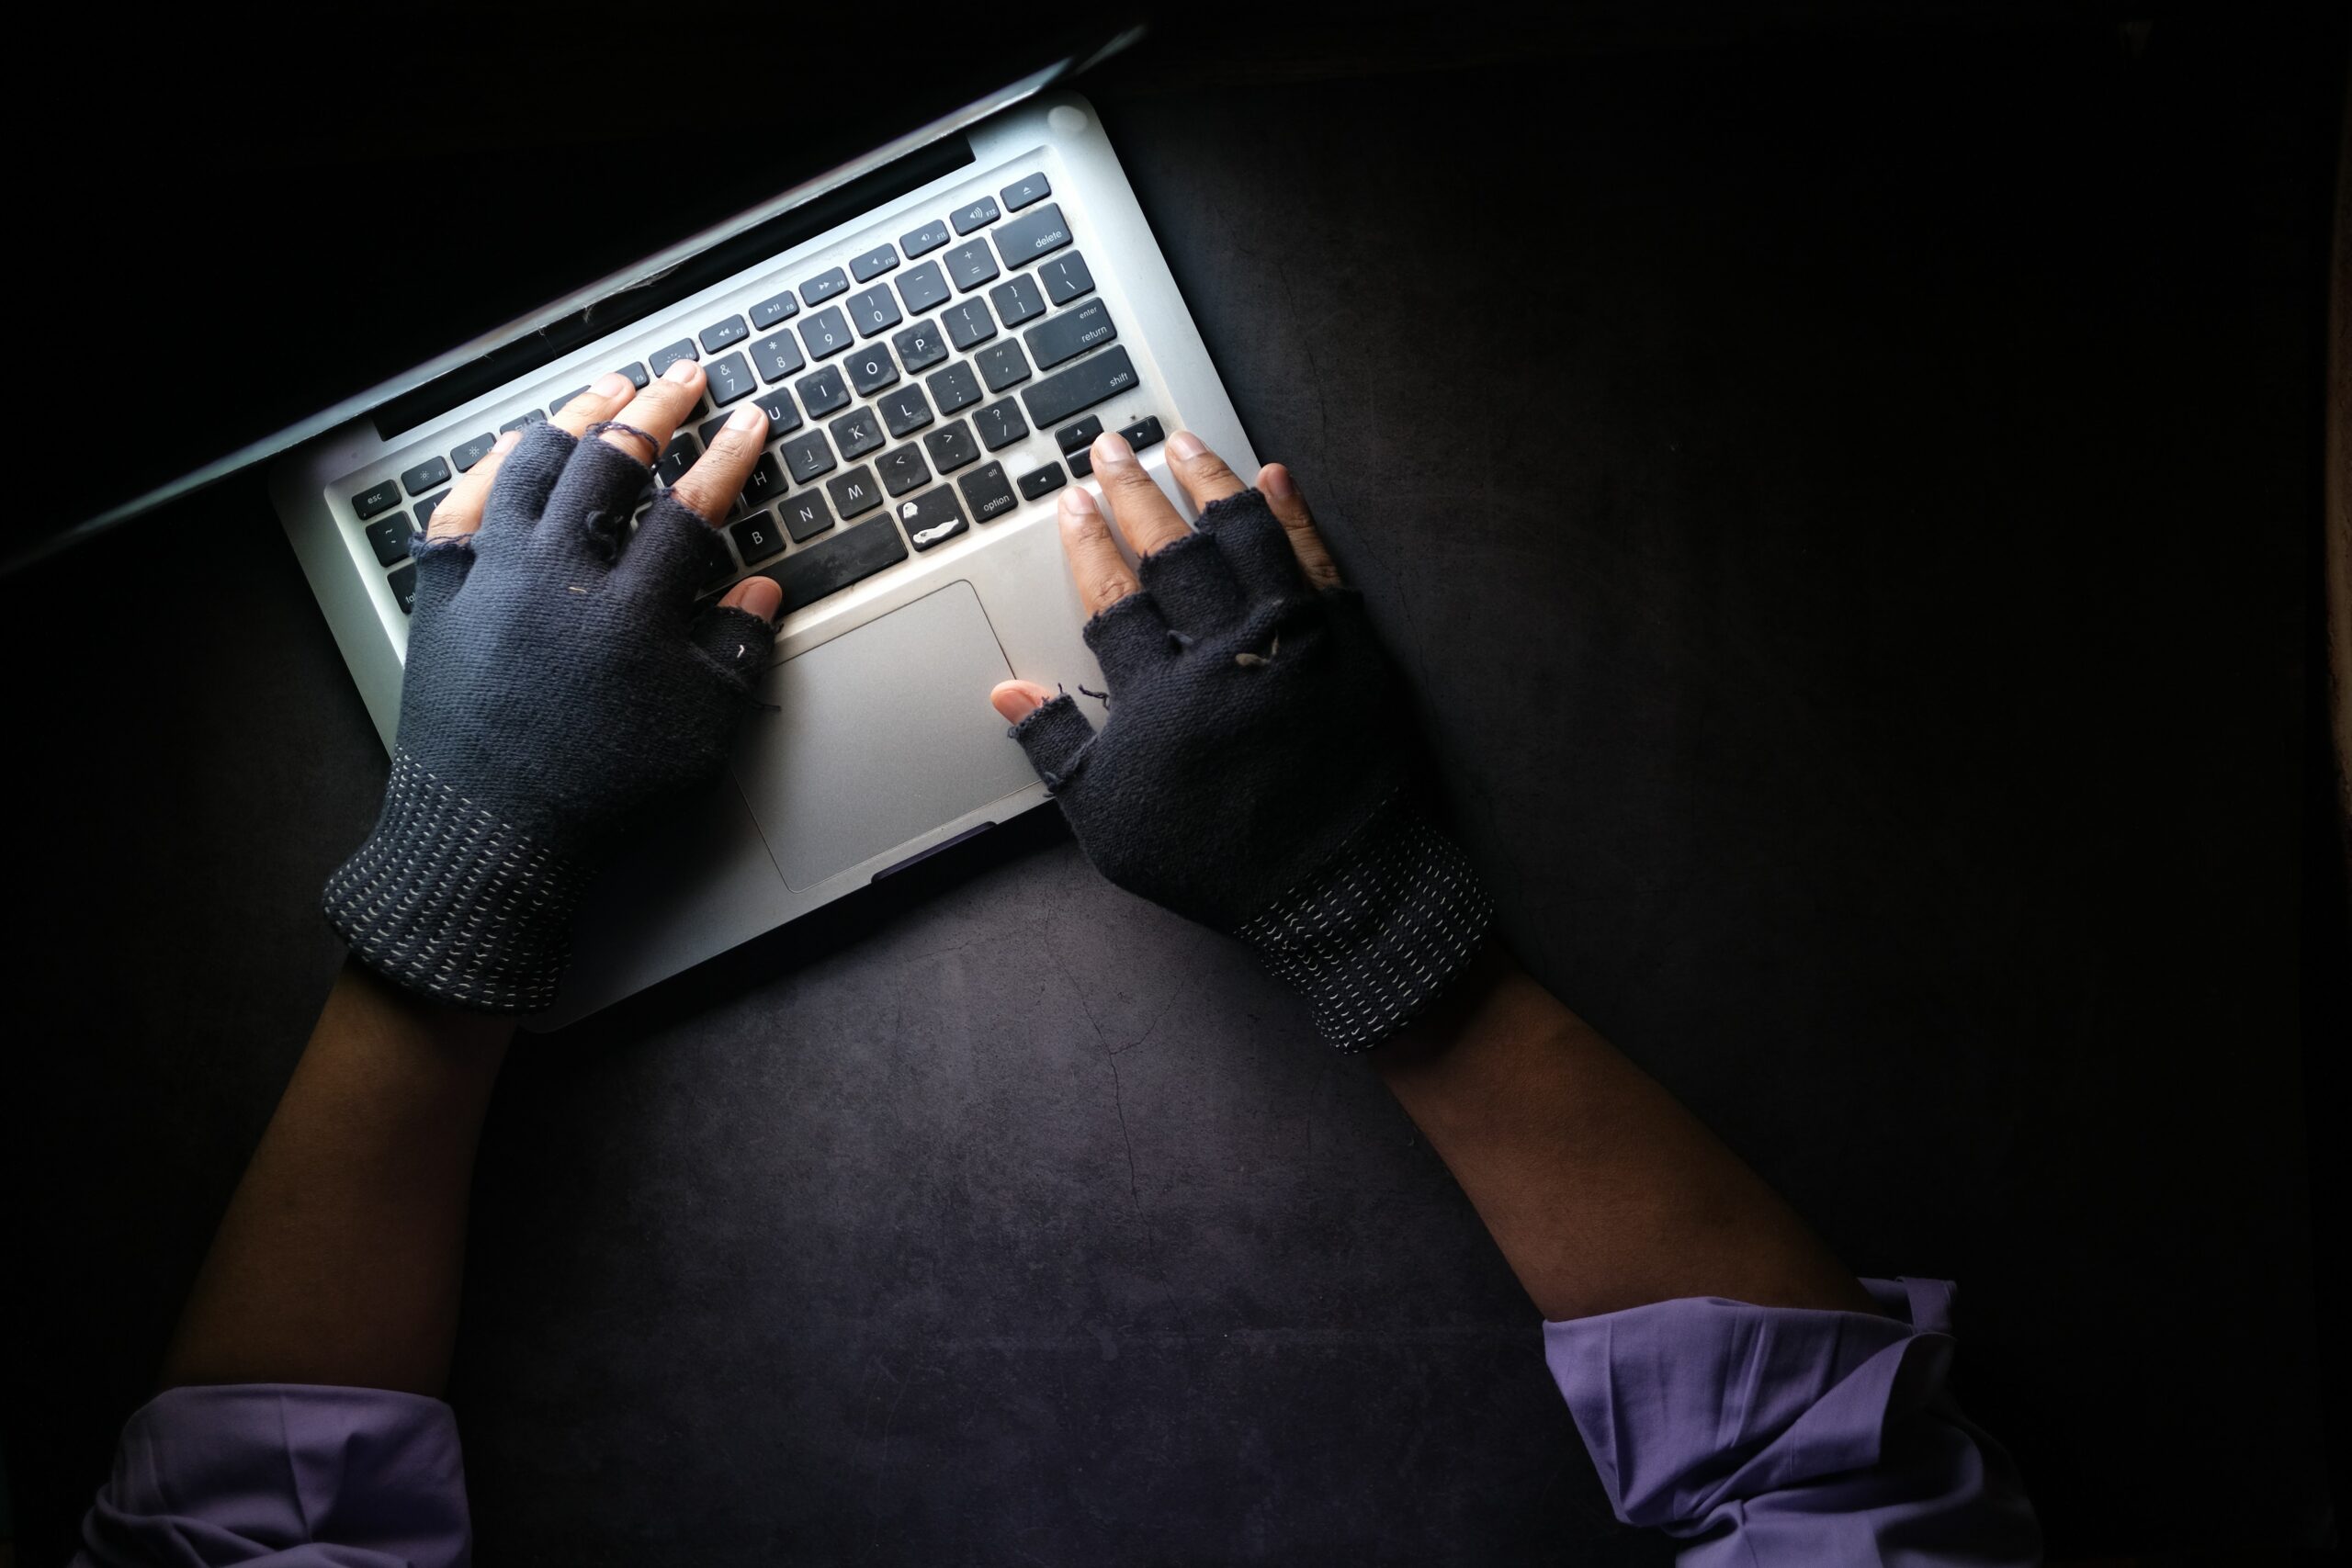 A person is typing on a laptop with gloves on, ensuring the security of their confidential information.